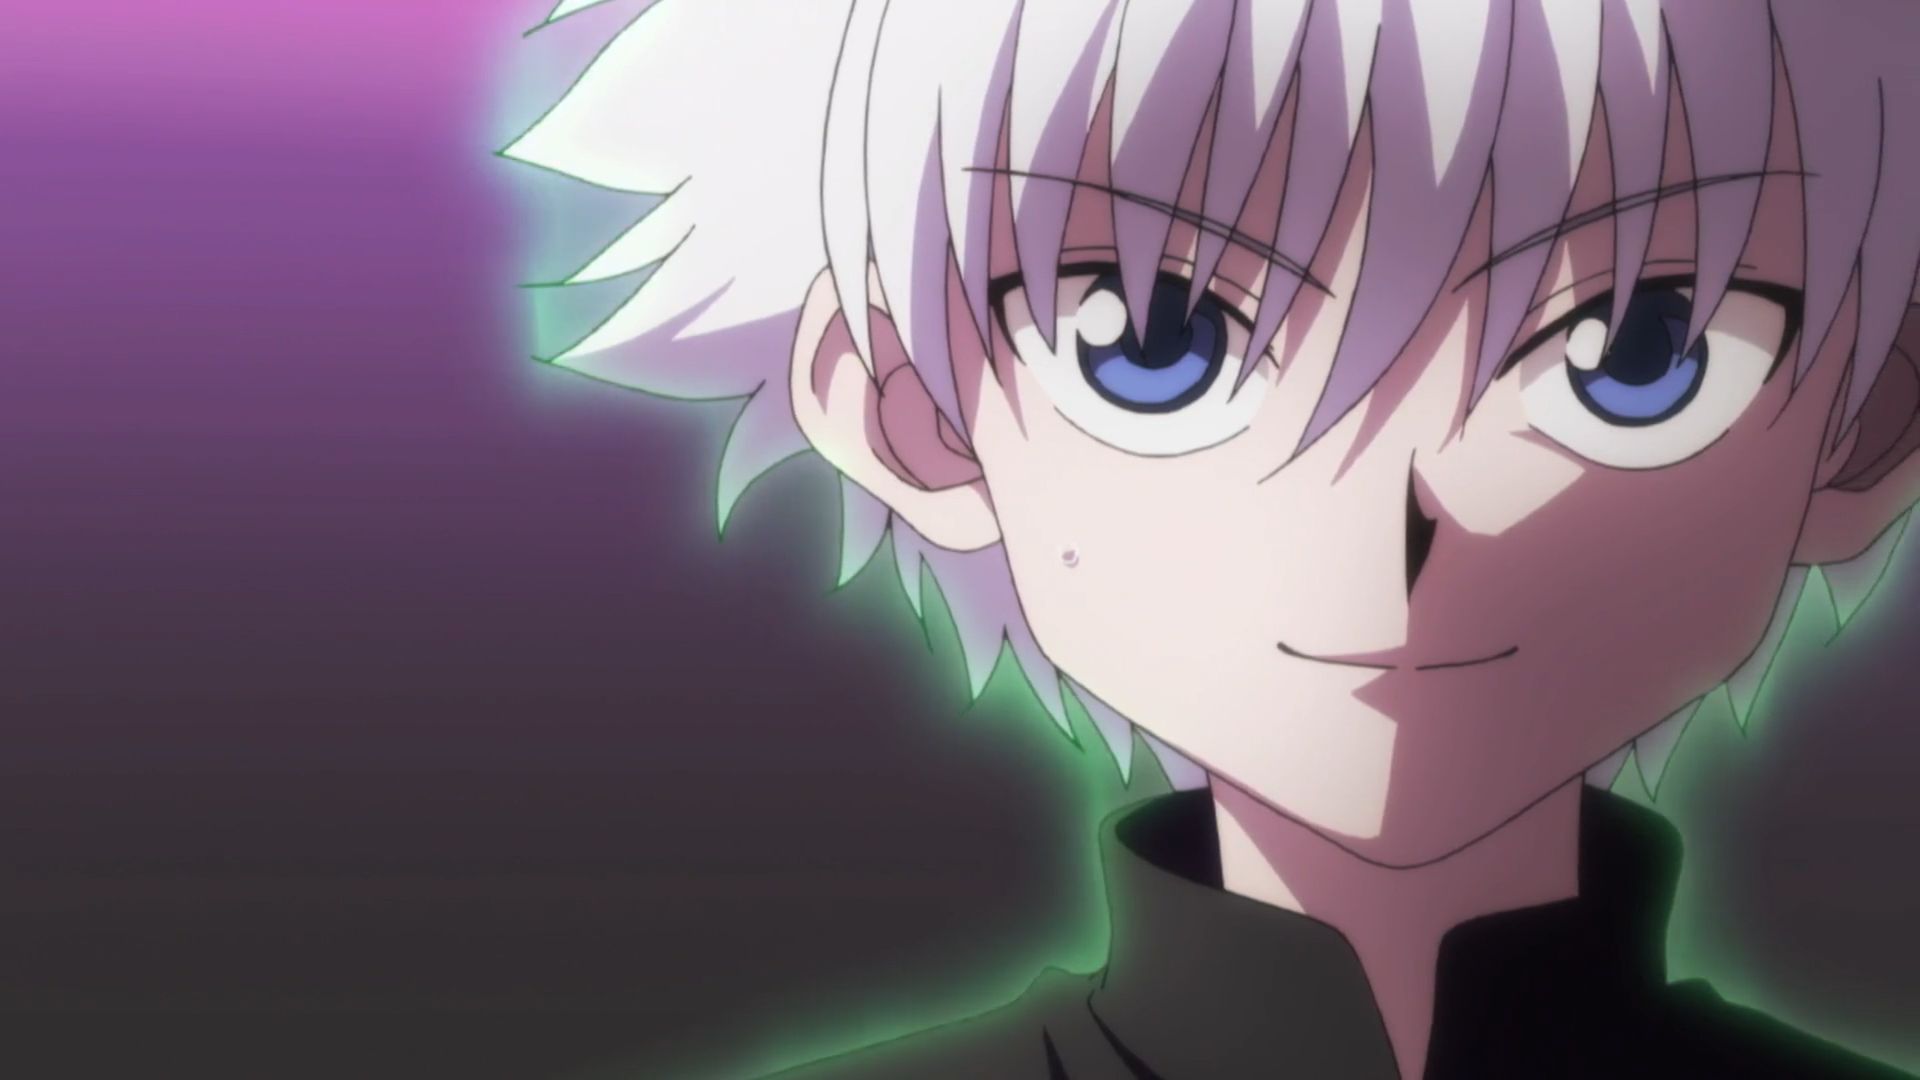 Killua Zoldyck from Hunter X Hunter is one of the coolest anime boys. 